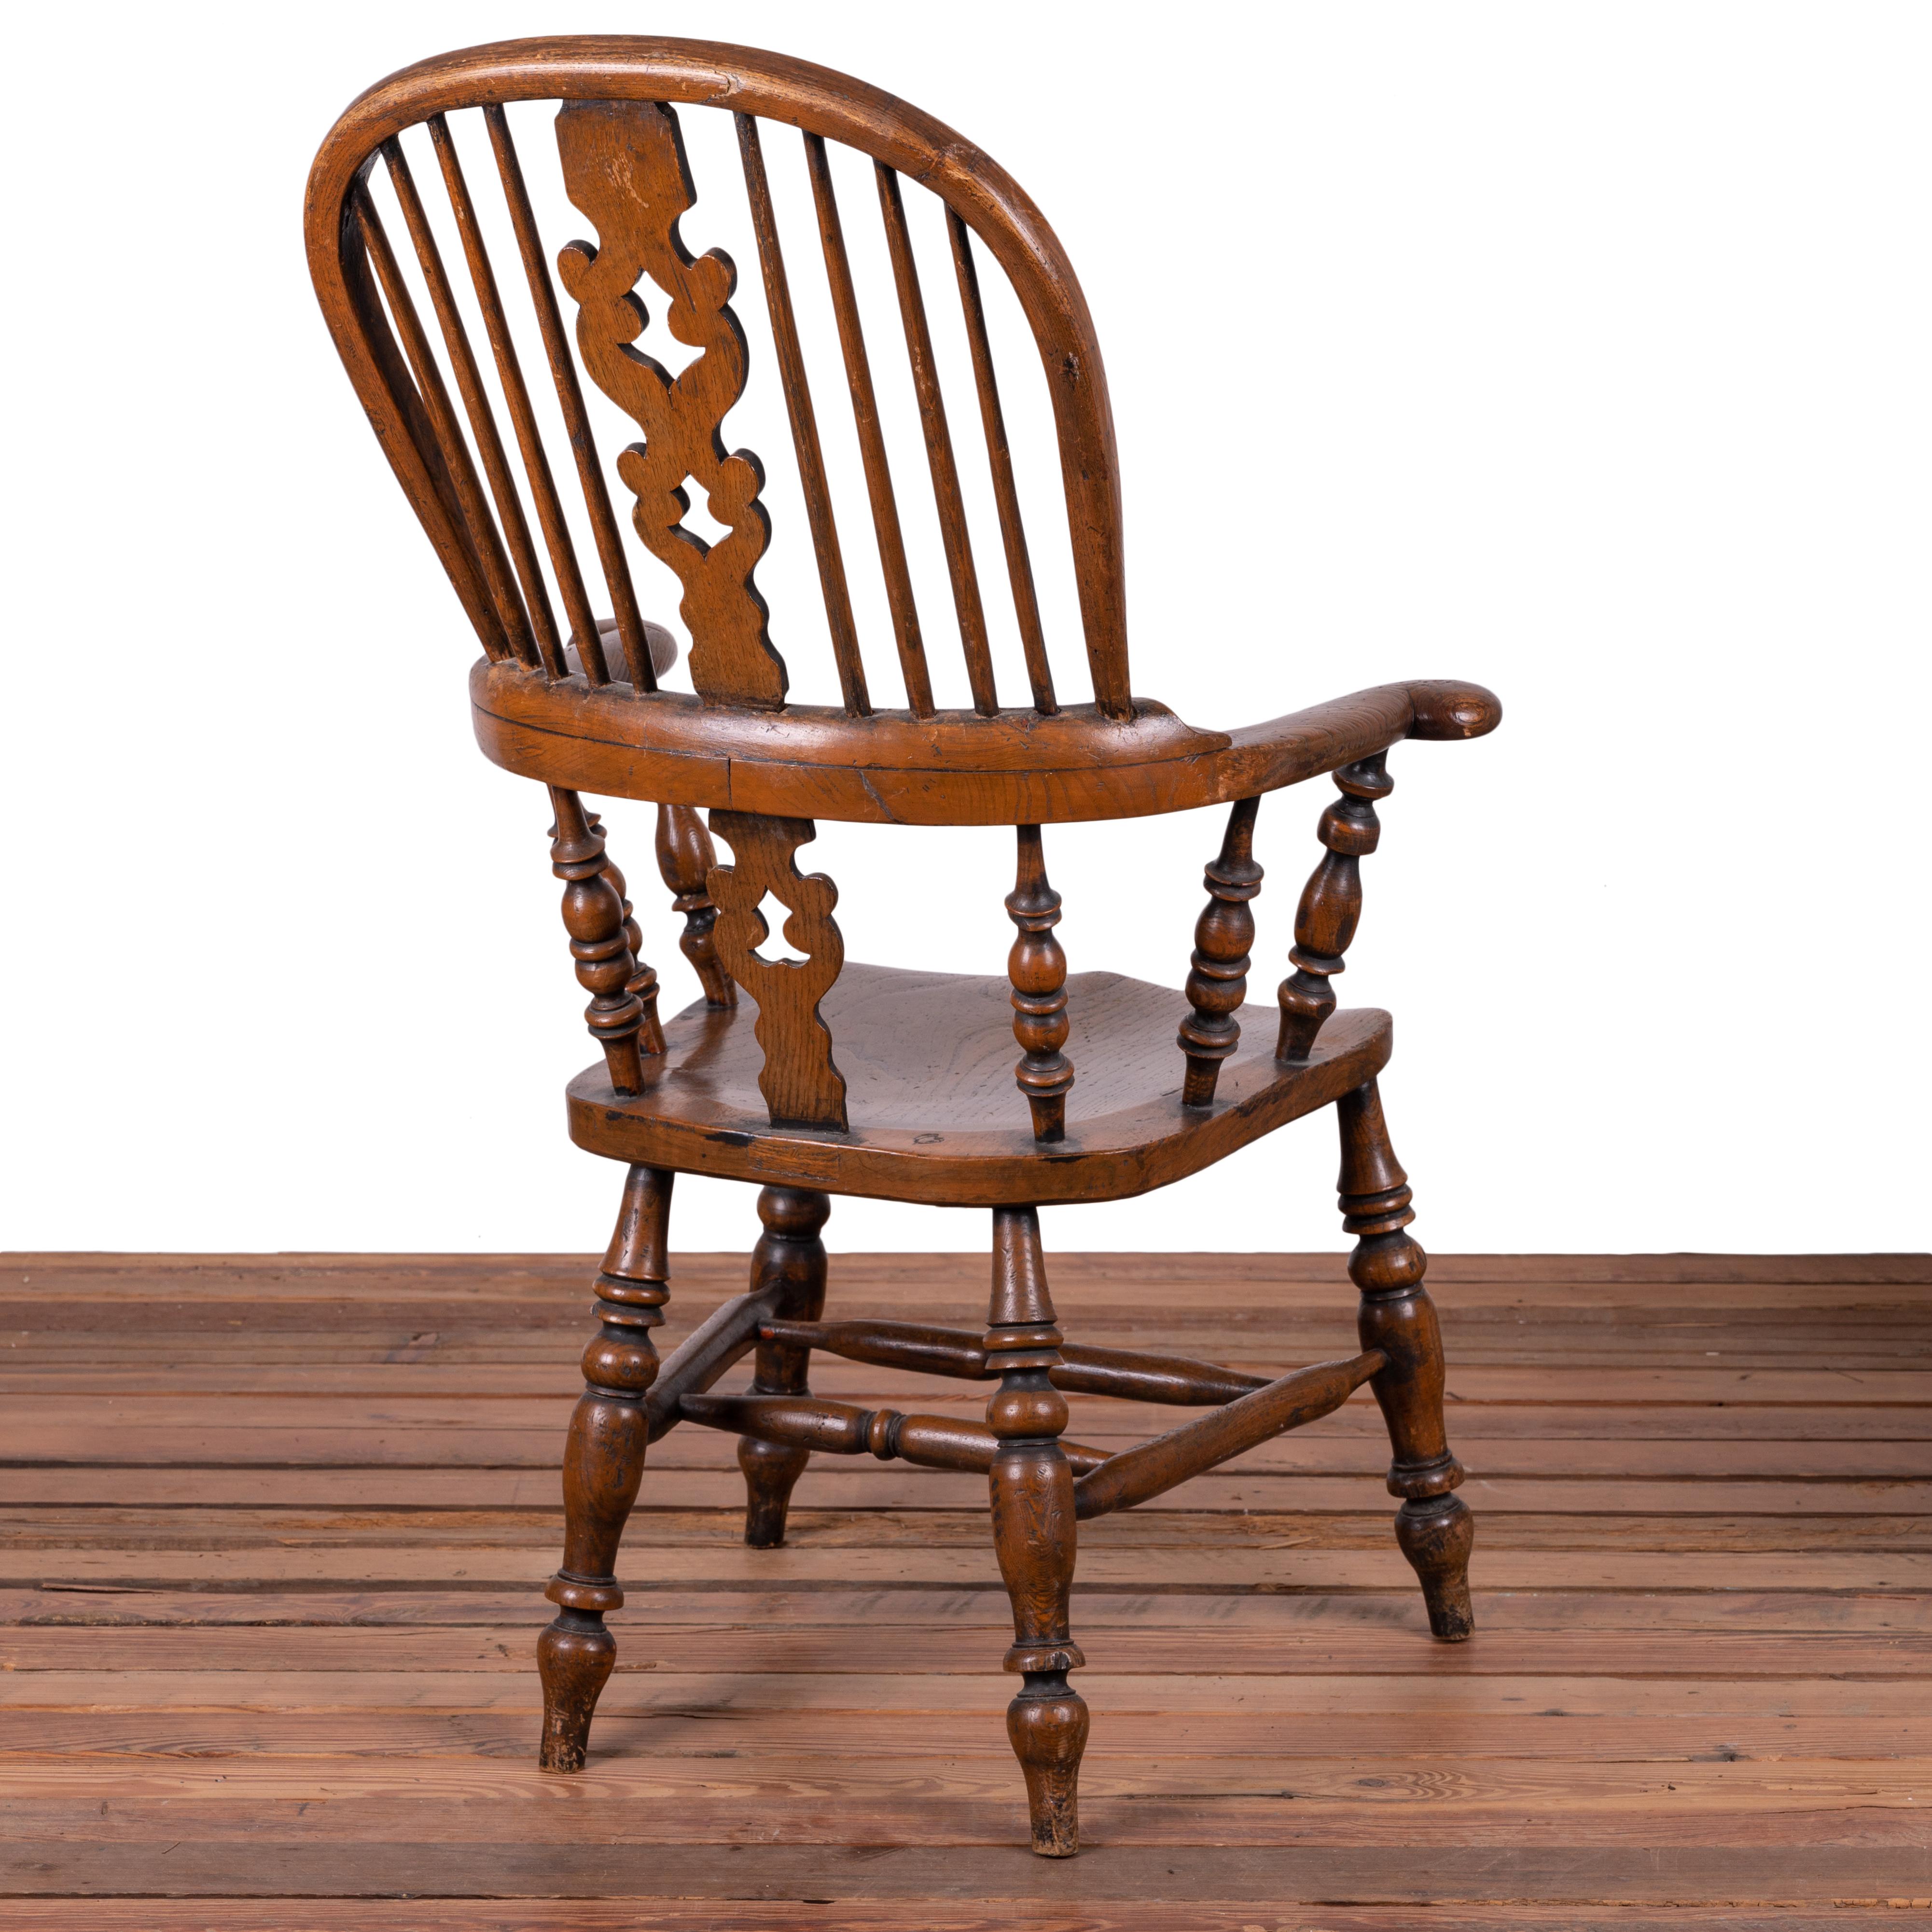 Wood English Elm Broad Arm Windsor Armchairs, 19th Century - Set of 4 For Sale